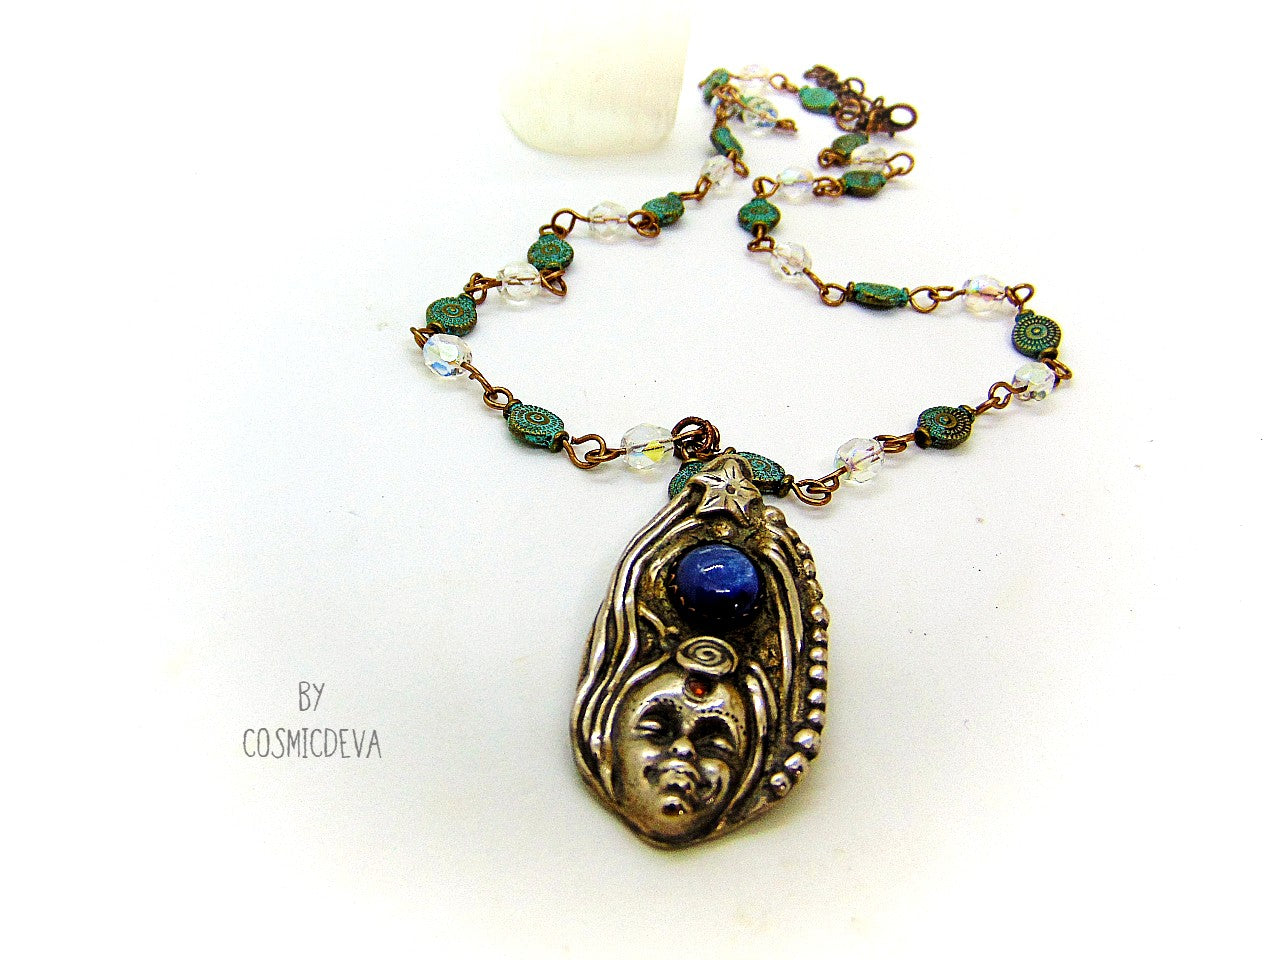 Be inspired with this unique, handmade Goddess Silver Bronze Necklace with a Blue Kyanite gemstone. Its one-of-a-kind design will bring beauty and enchantment to your life! A tiny fire opal adorns the goddess' third eye for an added spark of color and power. Crafted with love, it will be your cherished companion for many years.